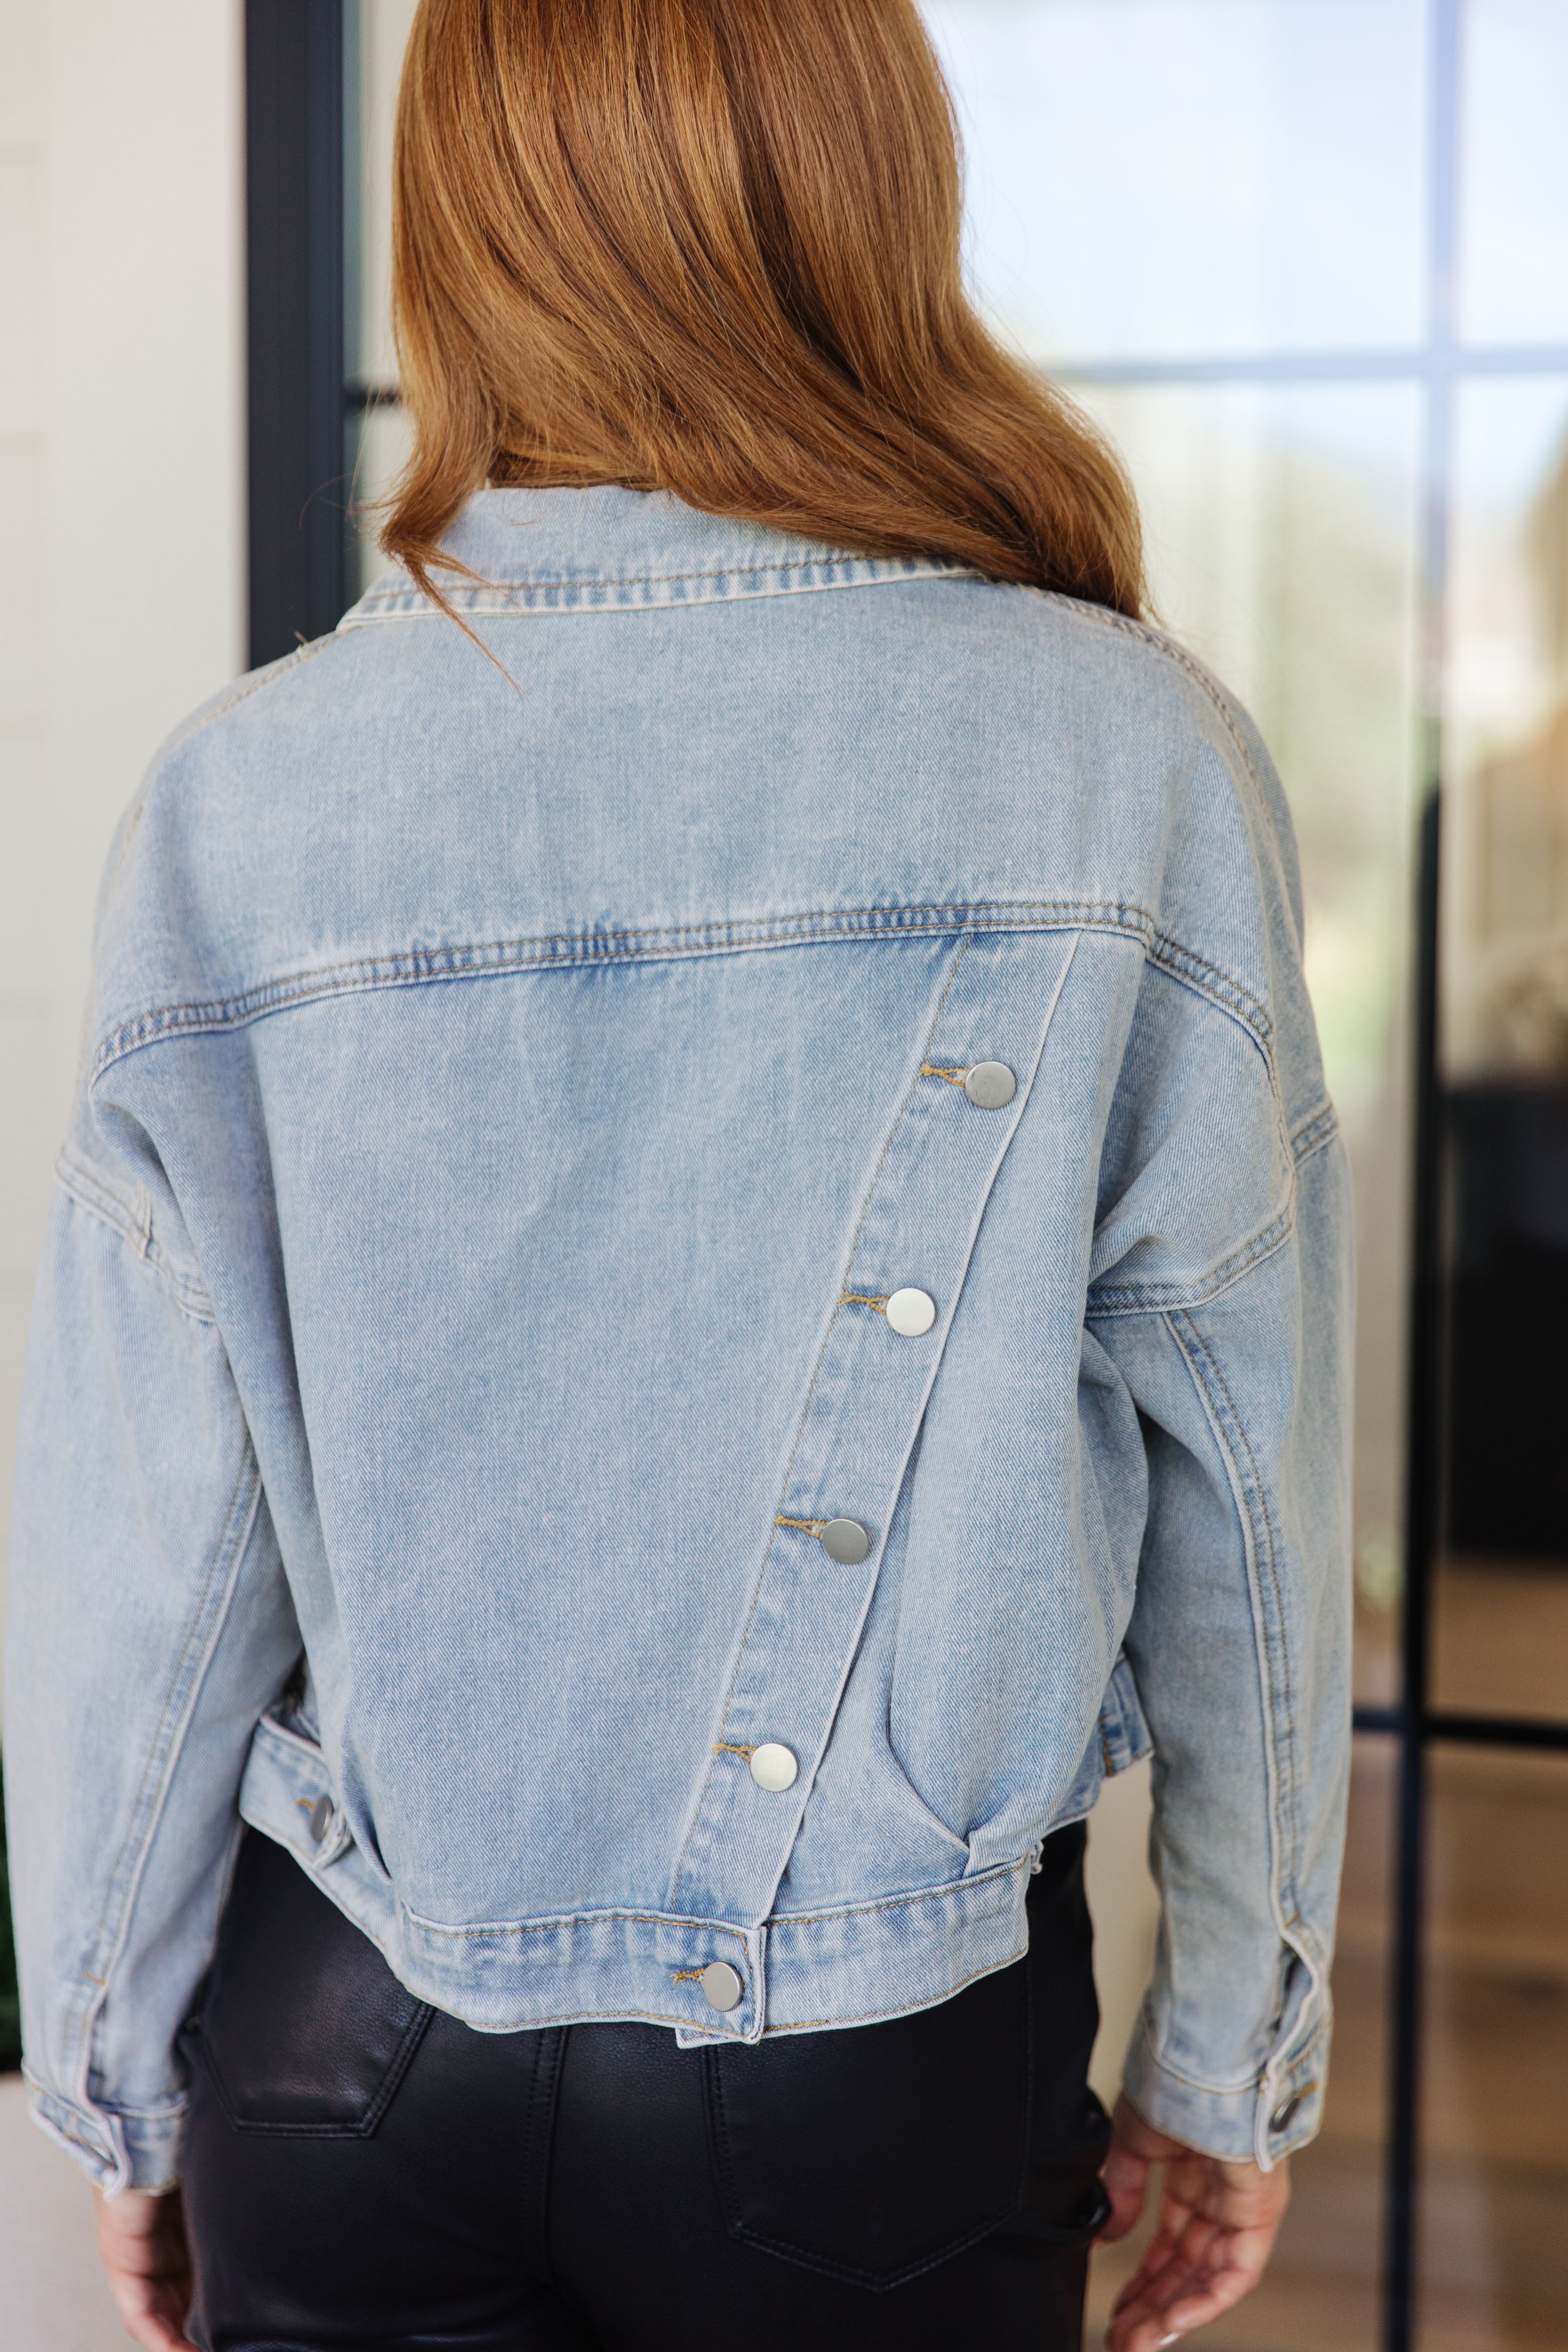 This Way and That Denim Jacket - Lola Cerina Boutique